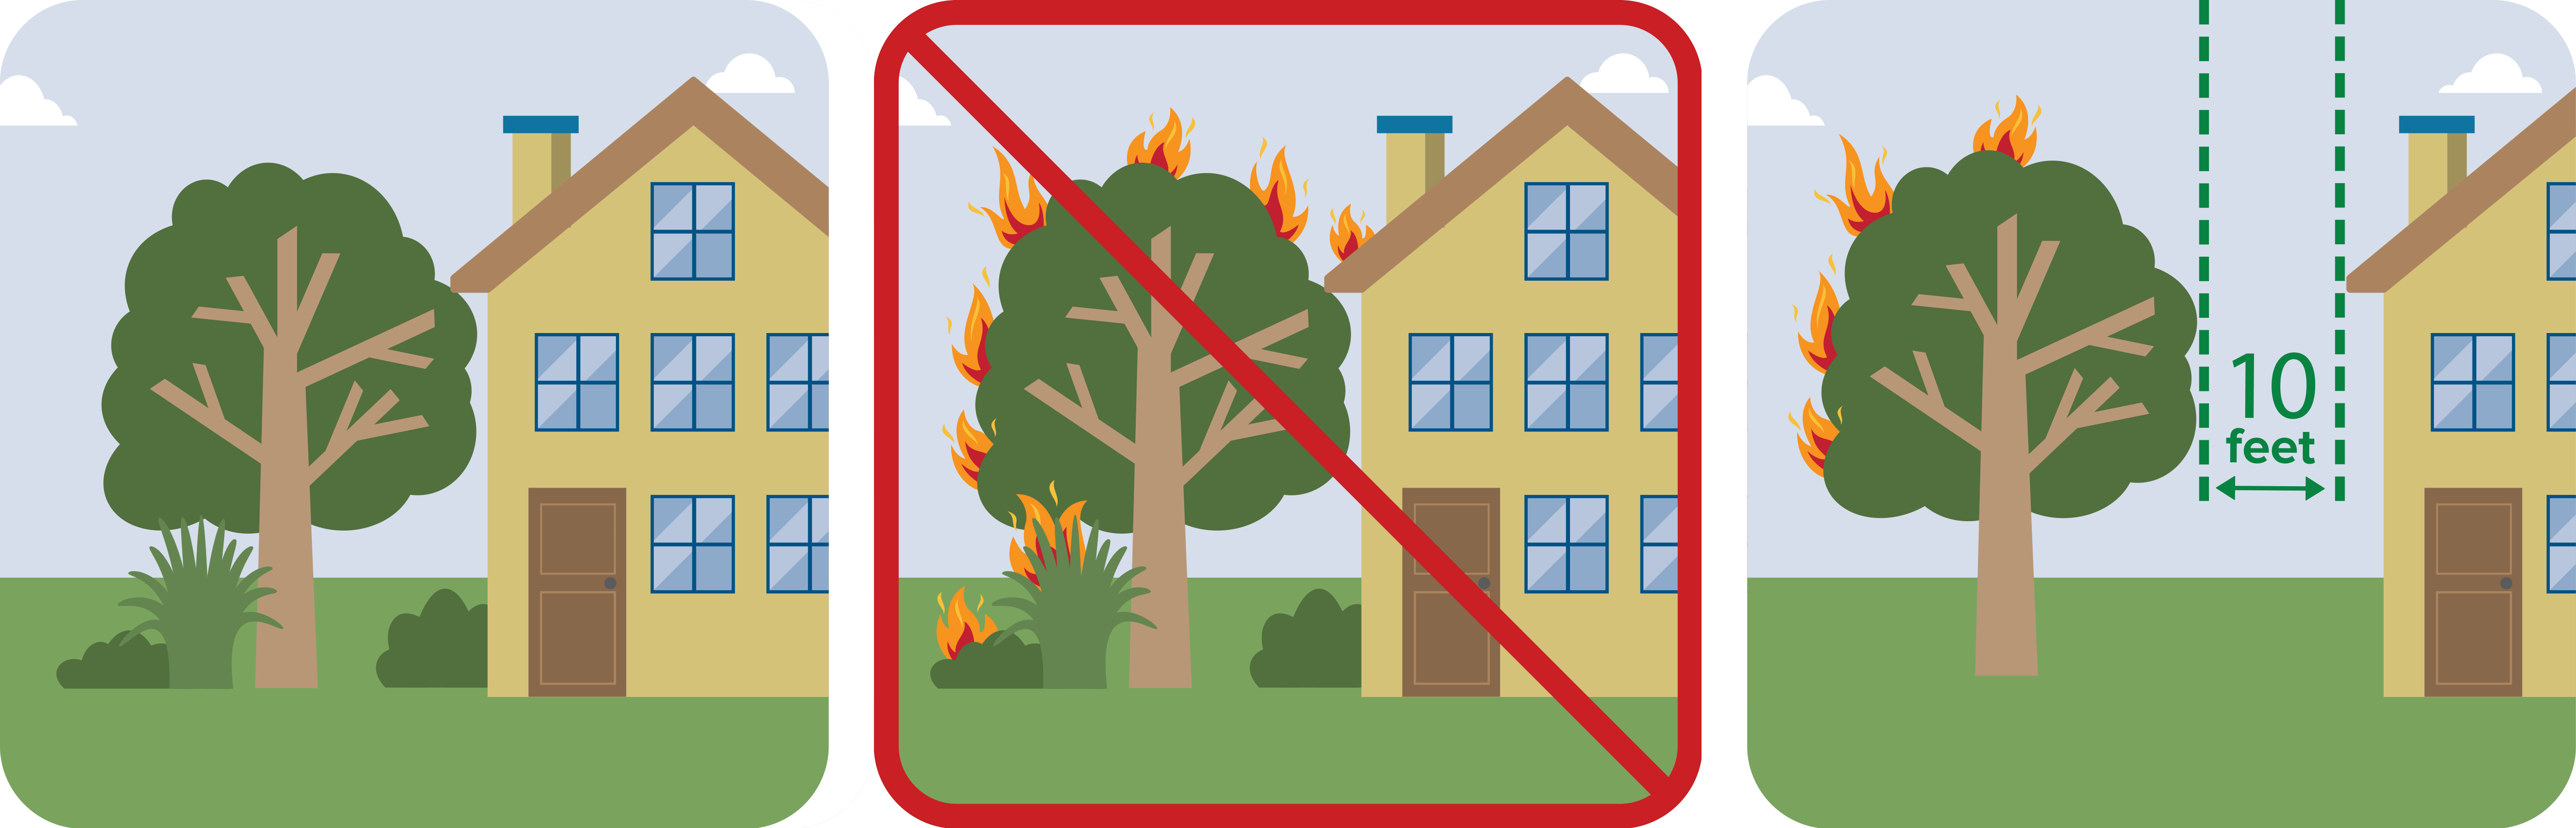 Pictograph: Remove ladder fuels from your yard